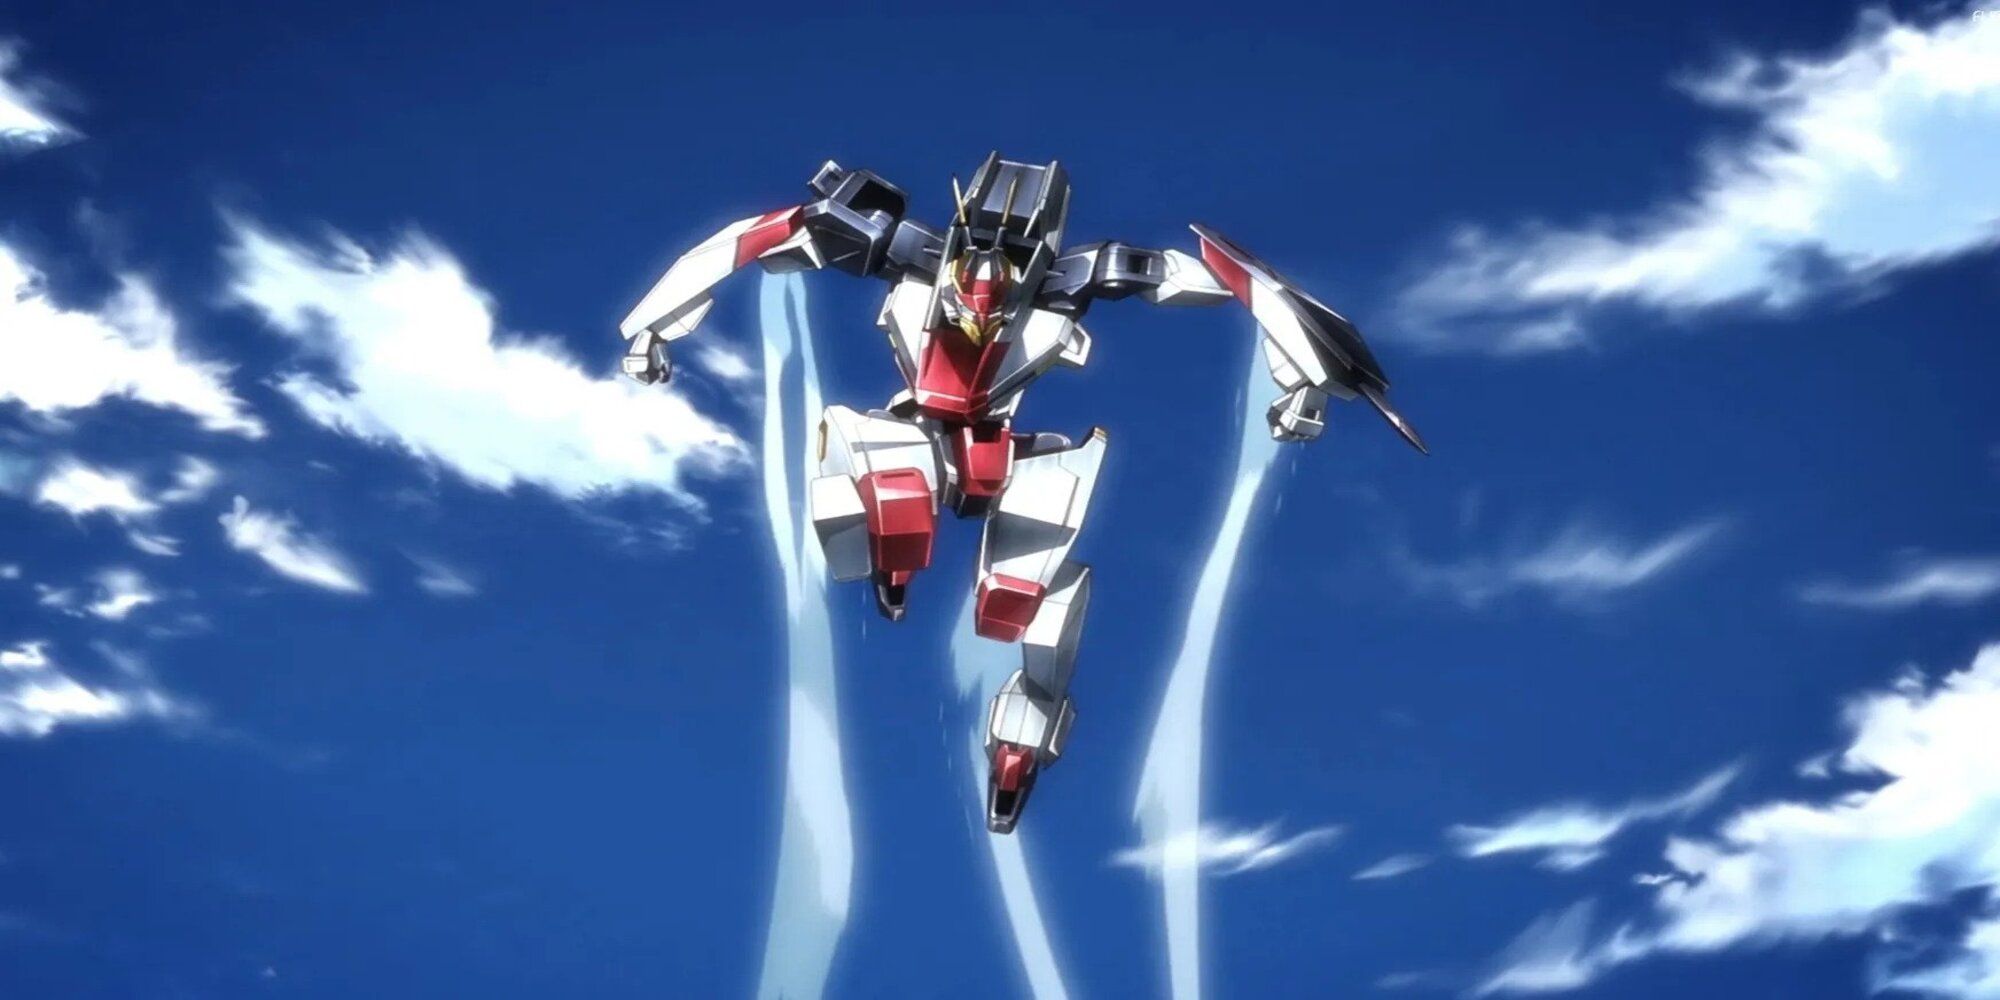 A silver and red robot jumps into the sky.